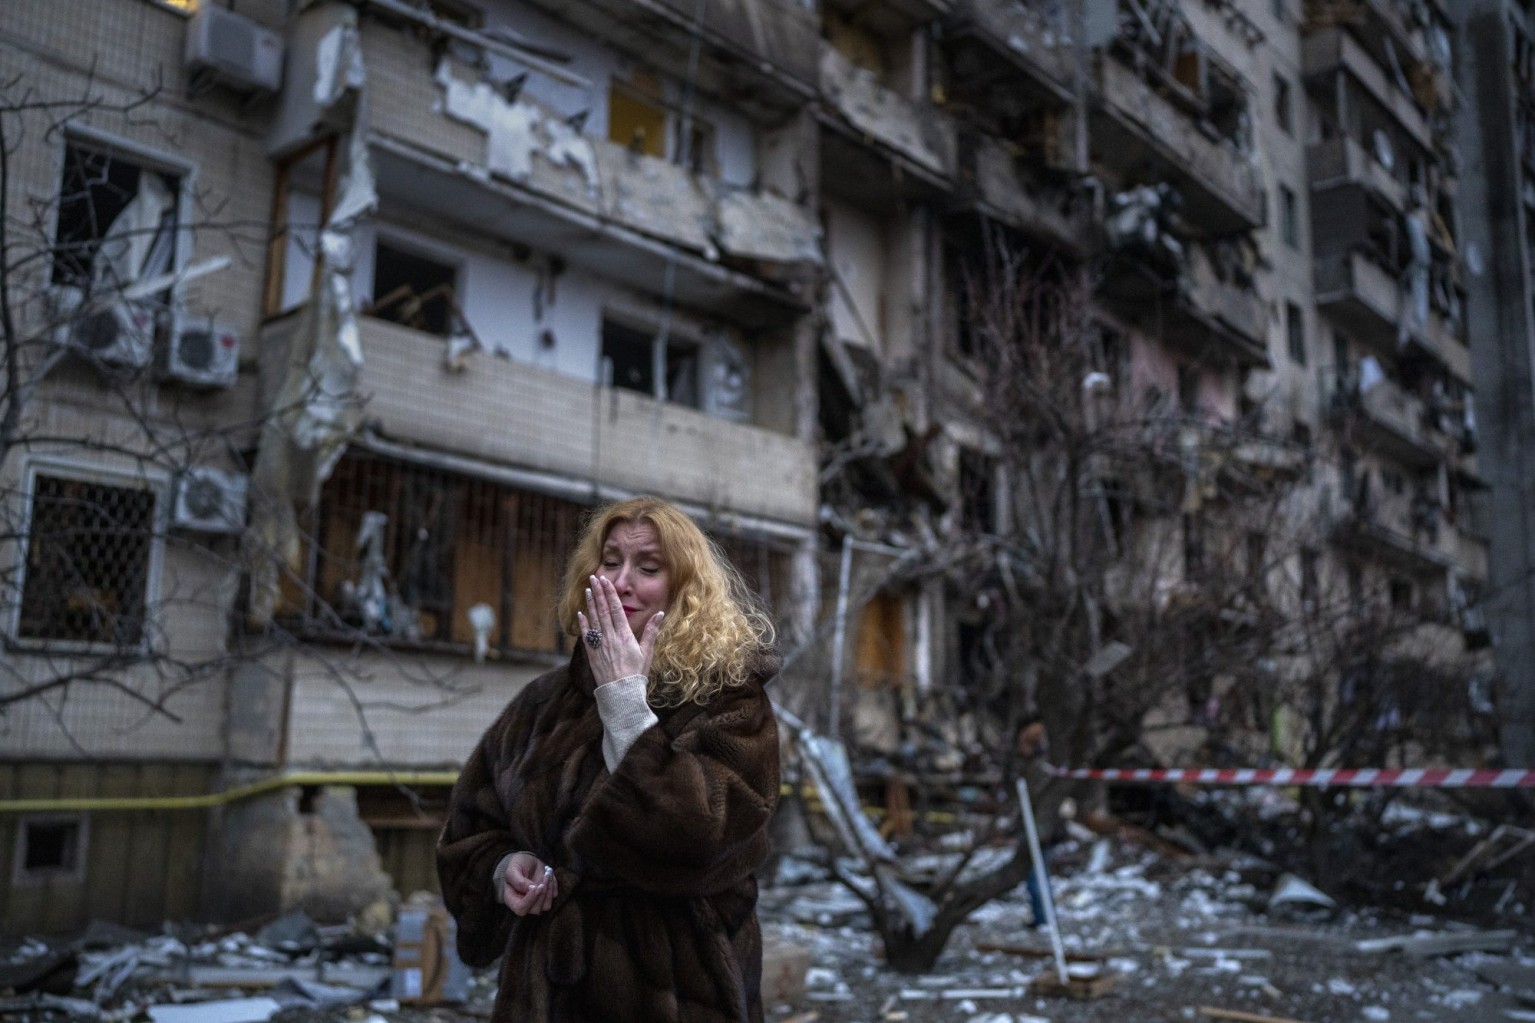  A Ukrainian woman reacts next to her house following a rocket attack in the city of Kyiv, Ukraine on Feb. 25, 2022.
                    AP

                    